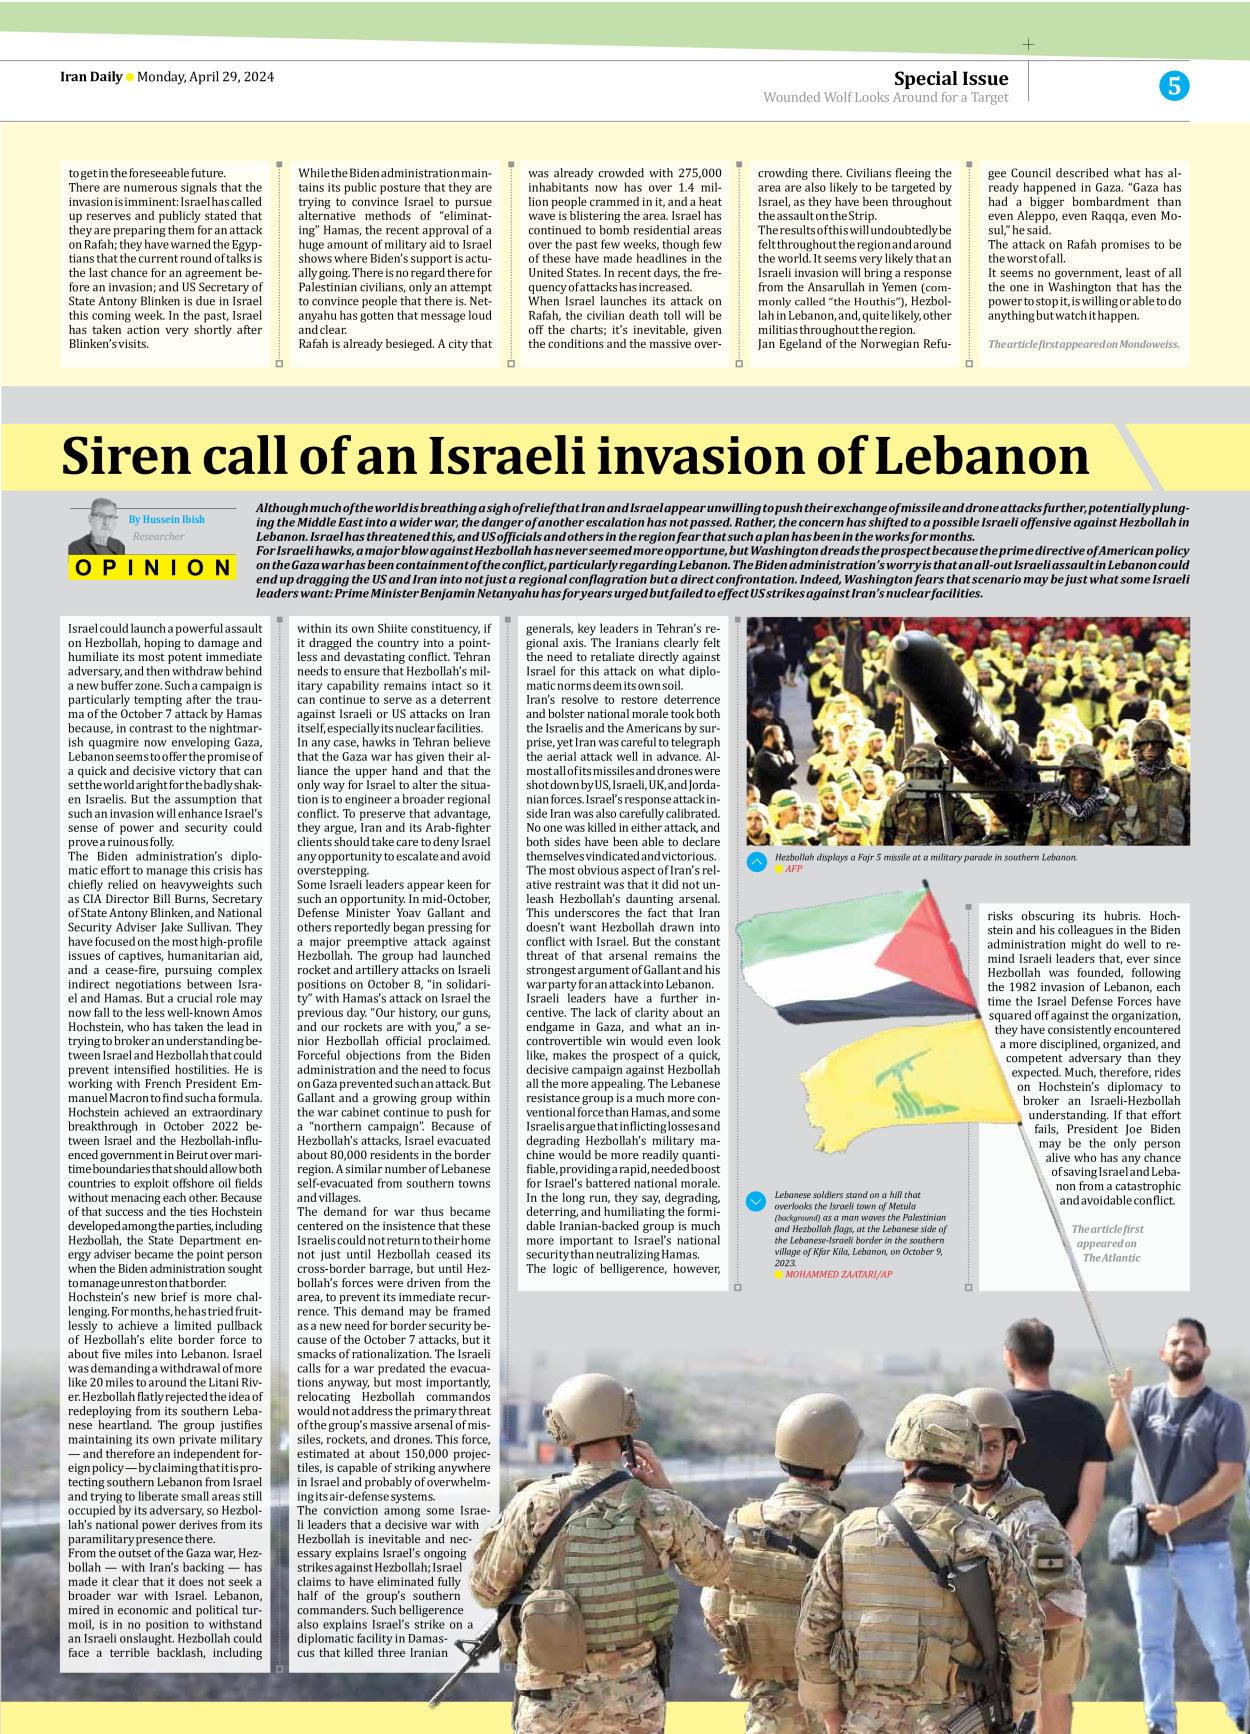 Iran Daily - Number Seven Thousand Five Hundred and Forty Five - 29 April 2024 - Page 5